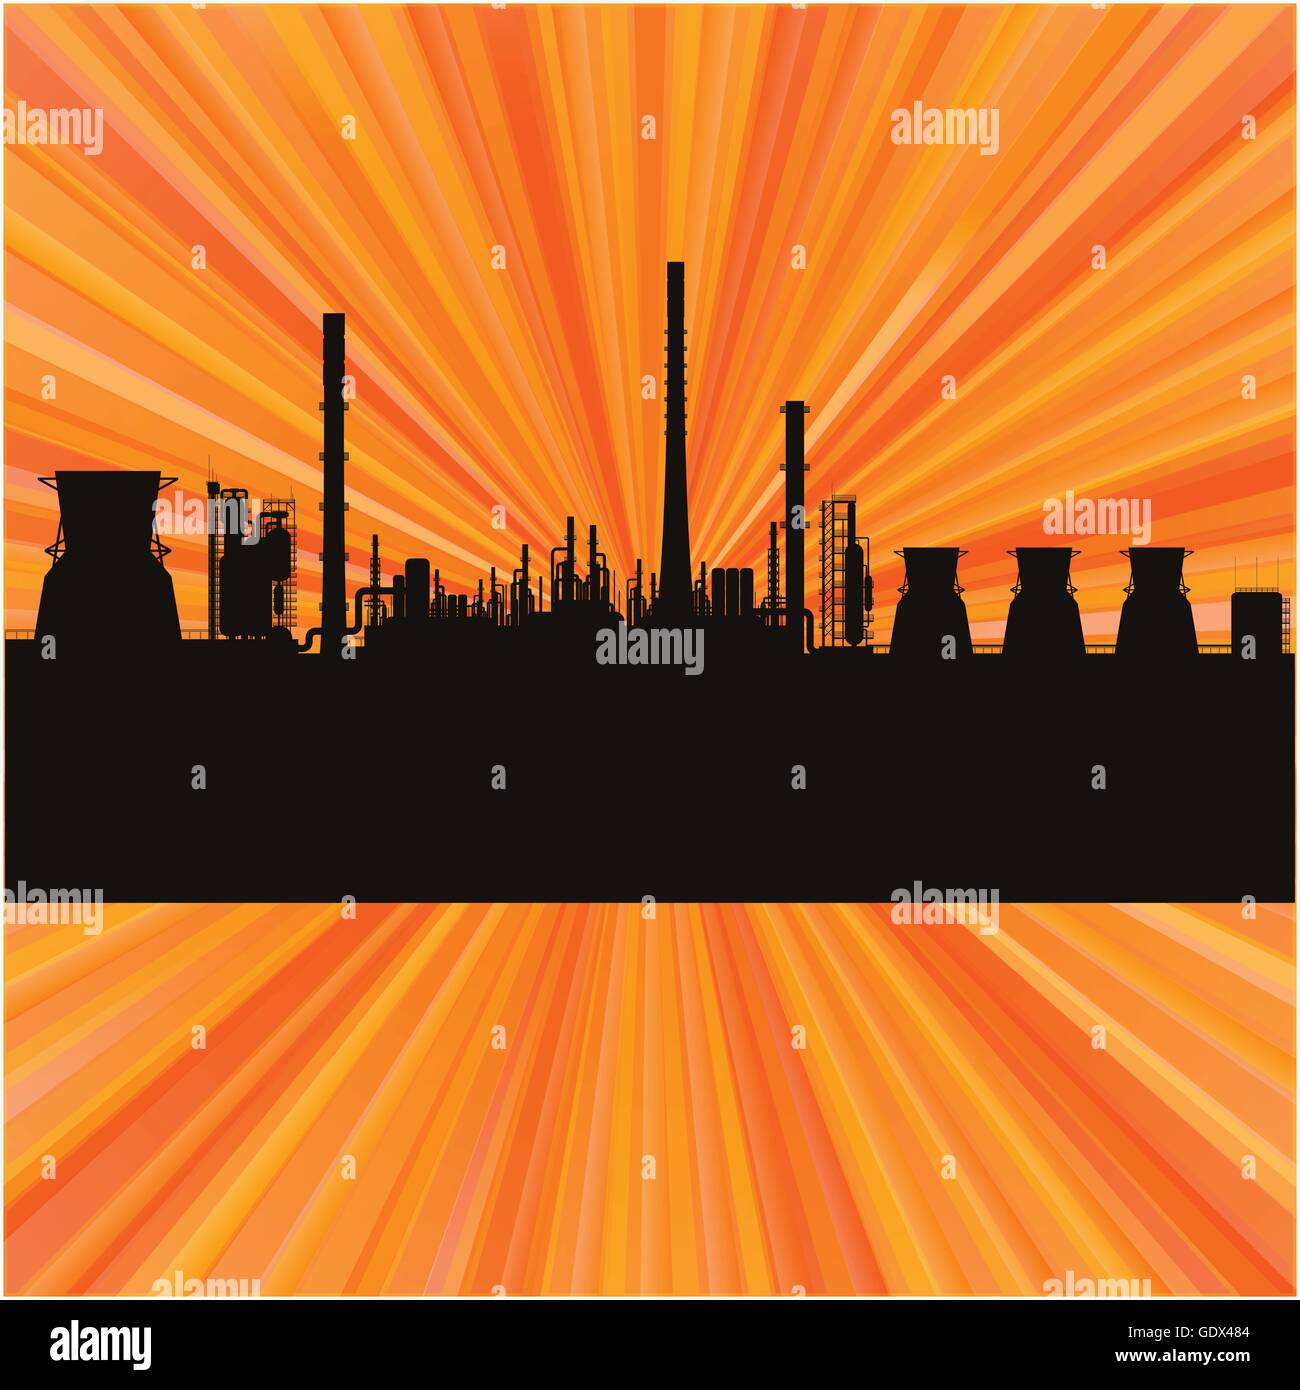 Oil refinery station background vector for poster Stock Vector